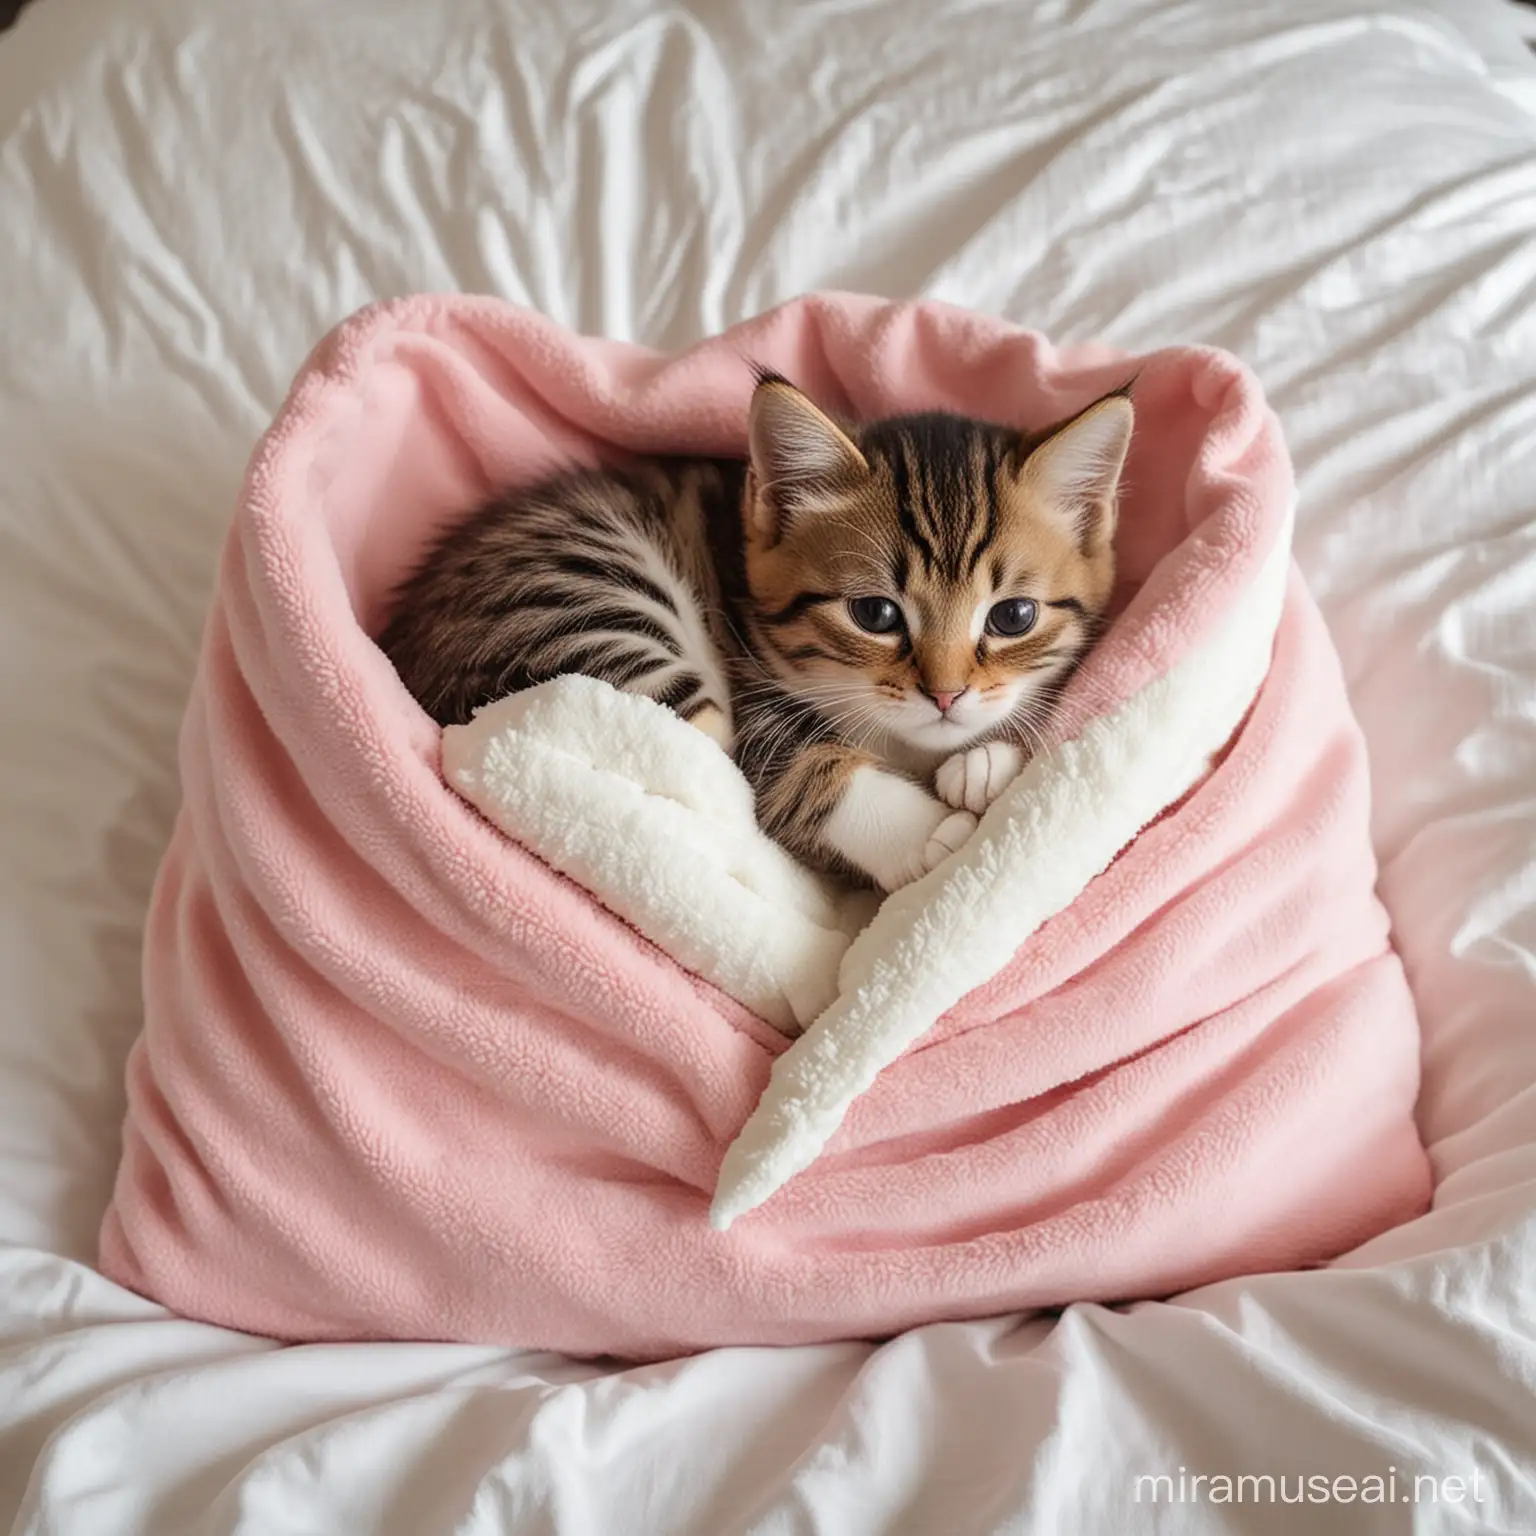 cute baby cat in pijamas in bed, sleeping on its back, head on pillow, with big warm blankets